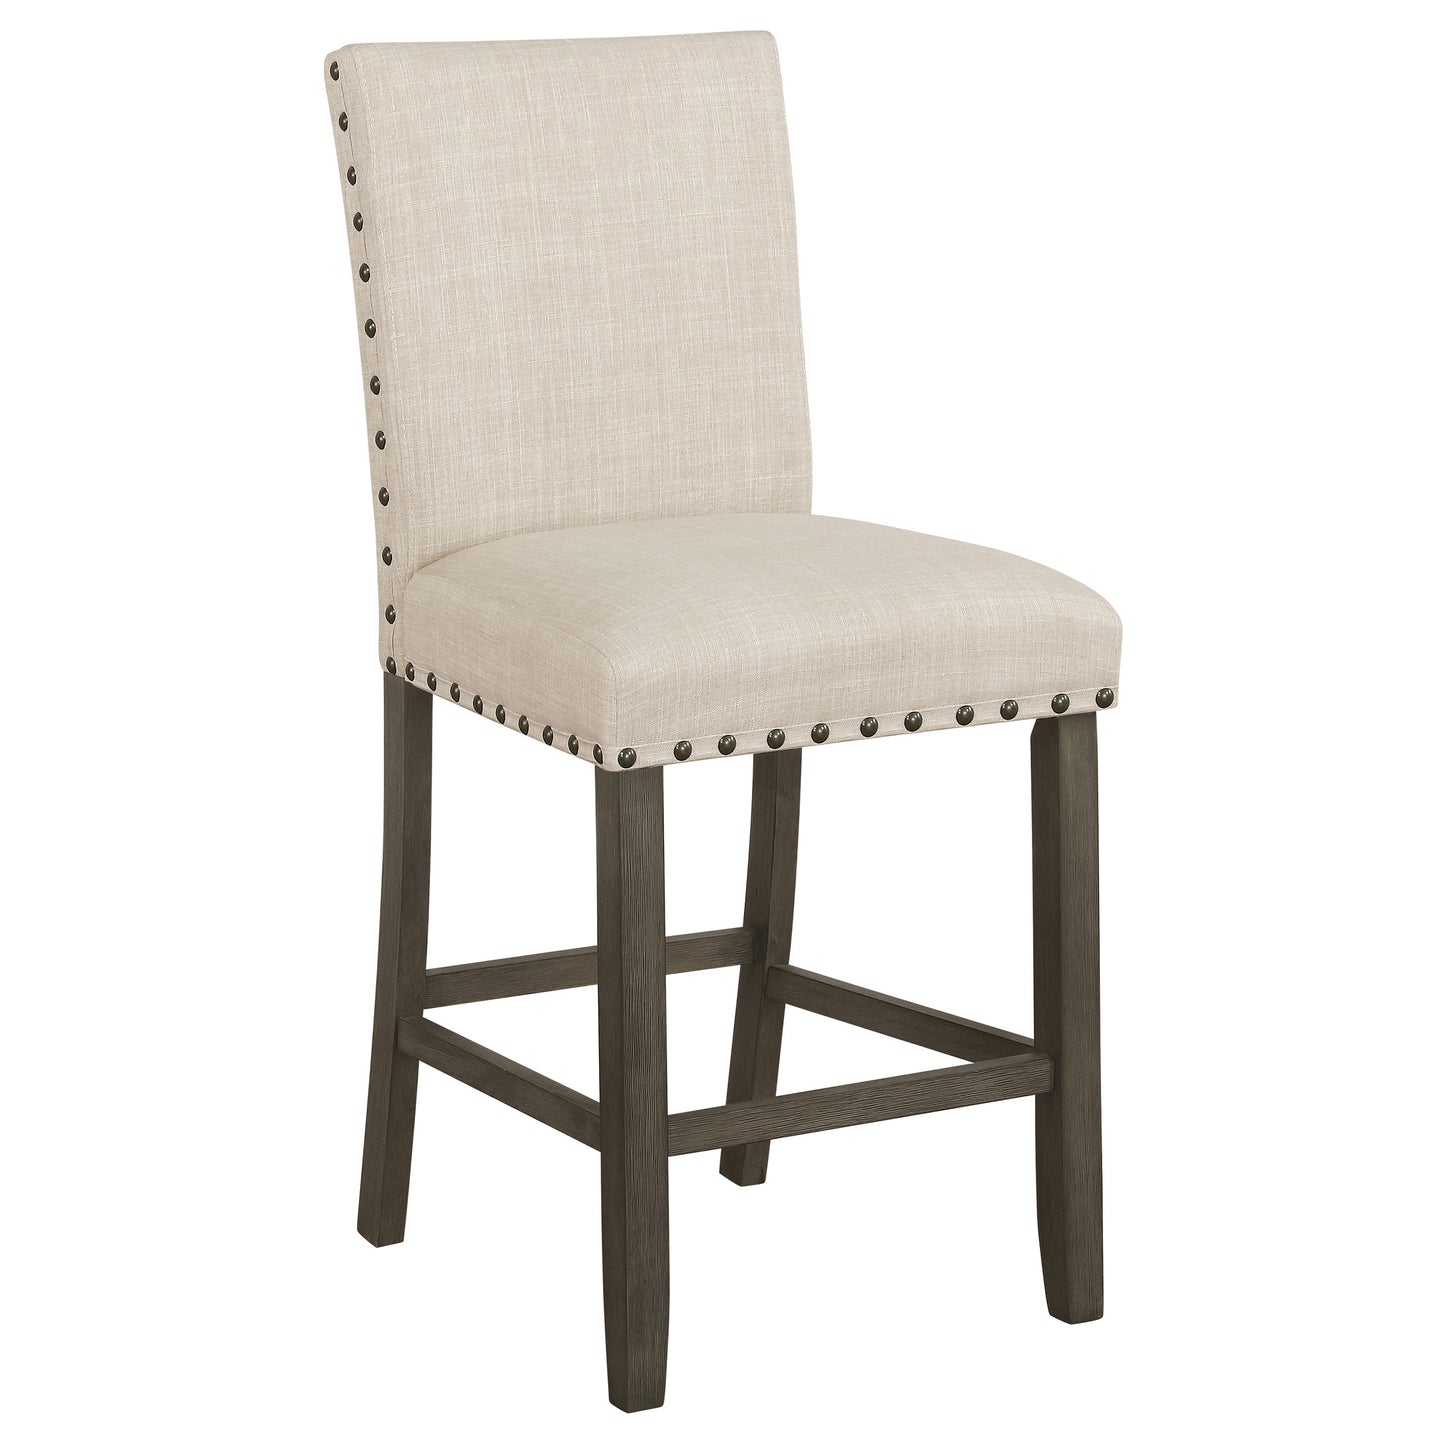 Ralland Upholstered Counter Height Stools with Nailhead Trim Beige (Set of 2)